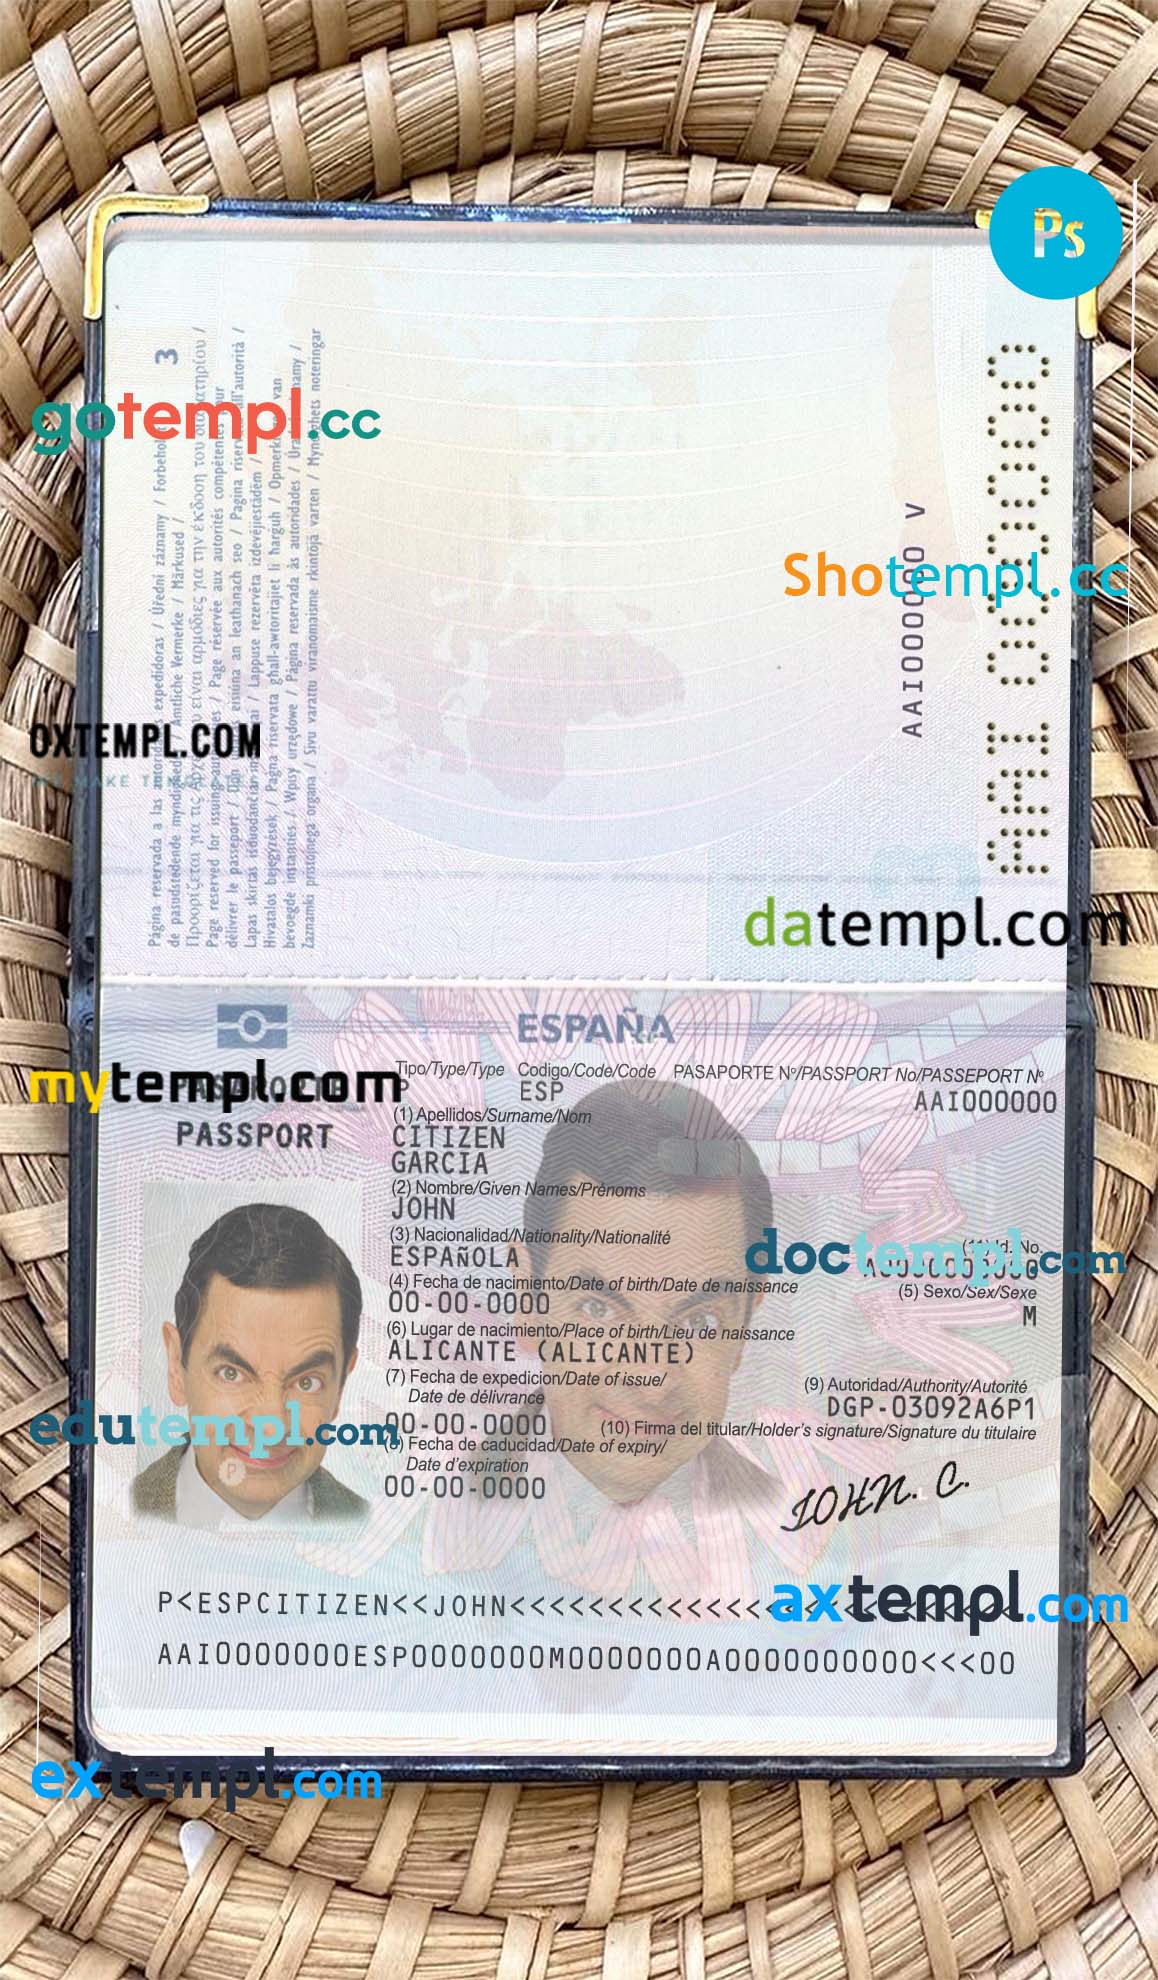 Spain passport PSD files, editable scan and photo-realistic look sample, 2 in 1